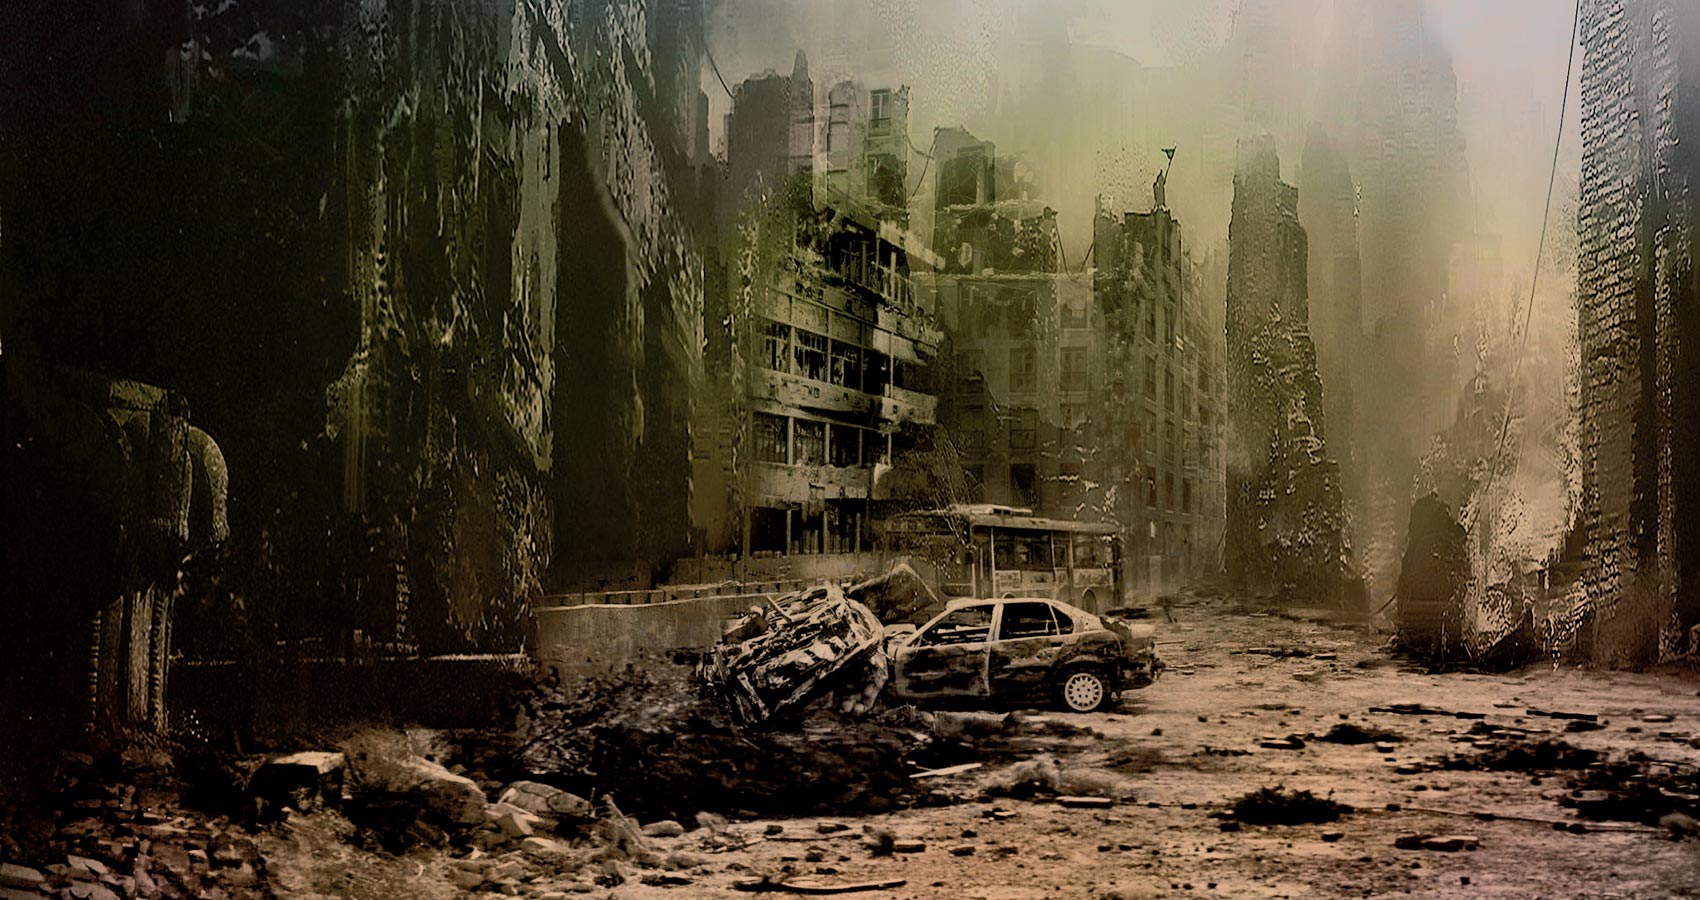 War - Humanity Lost, poetry by Dr. Y P Kalra at Spillwords.com